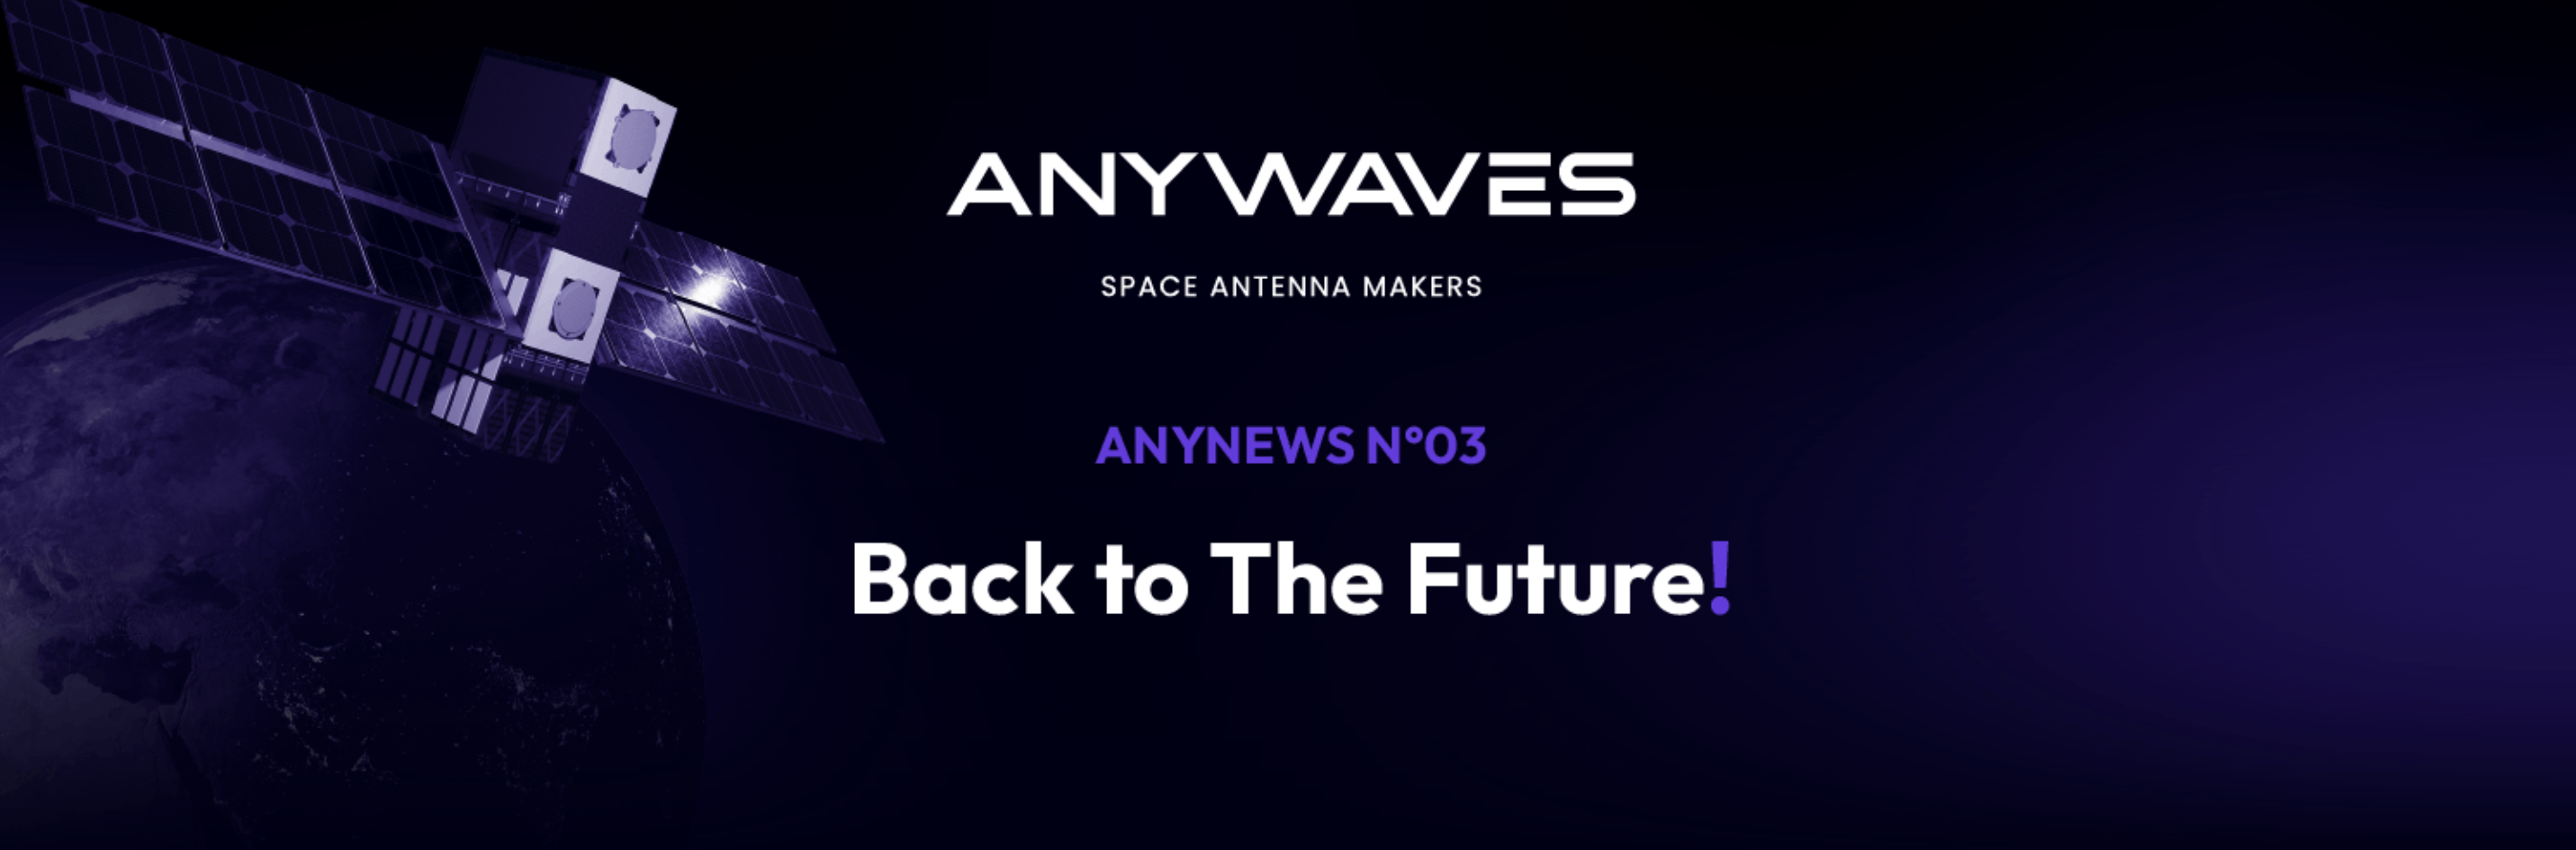 Anynews n°3 - Back to the Future